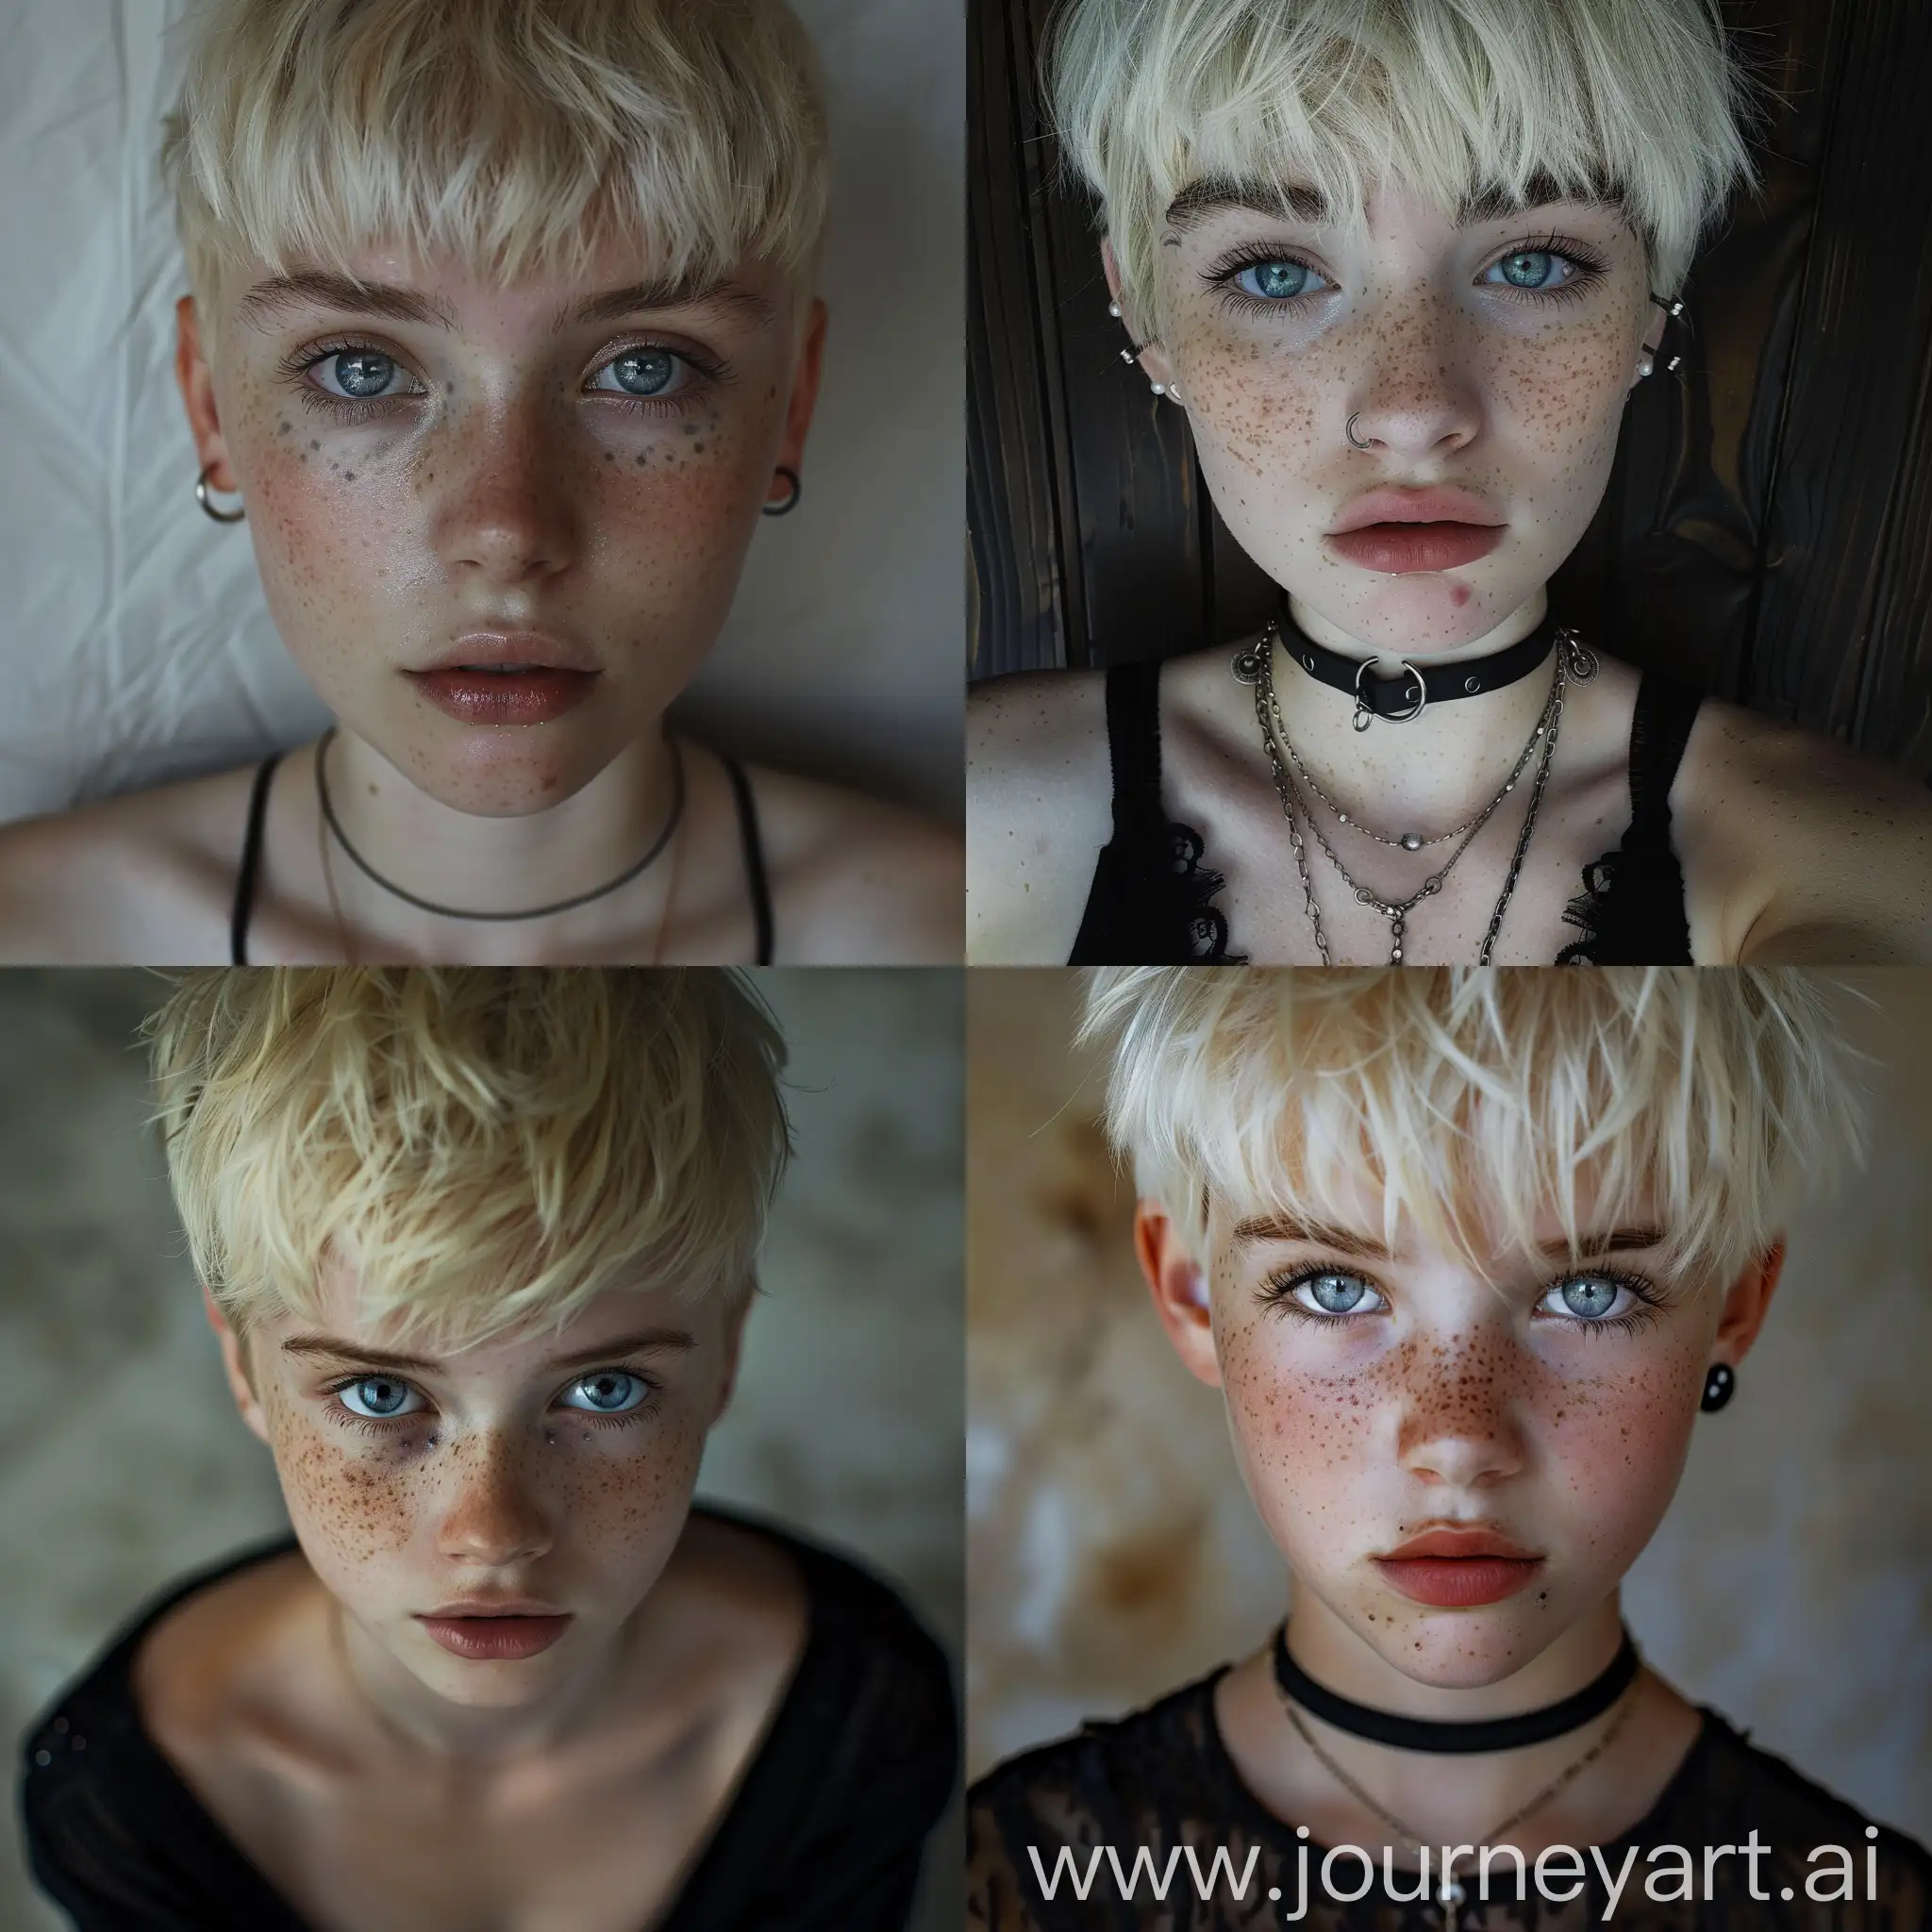 Goth-Teenage-Girl-with-Pixie-Cut-Blonde-Hair-and-Icy-Blue-Eyes